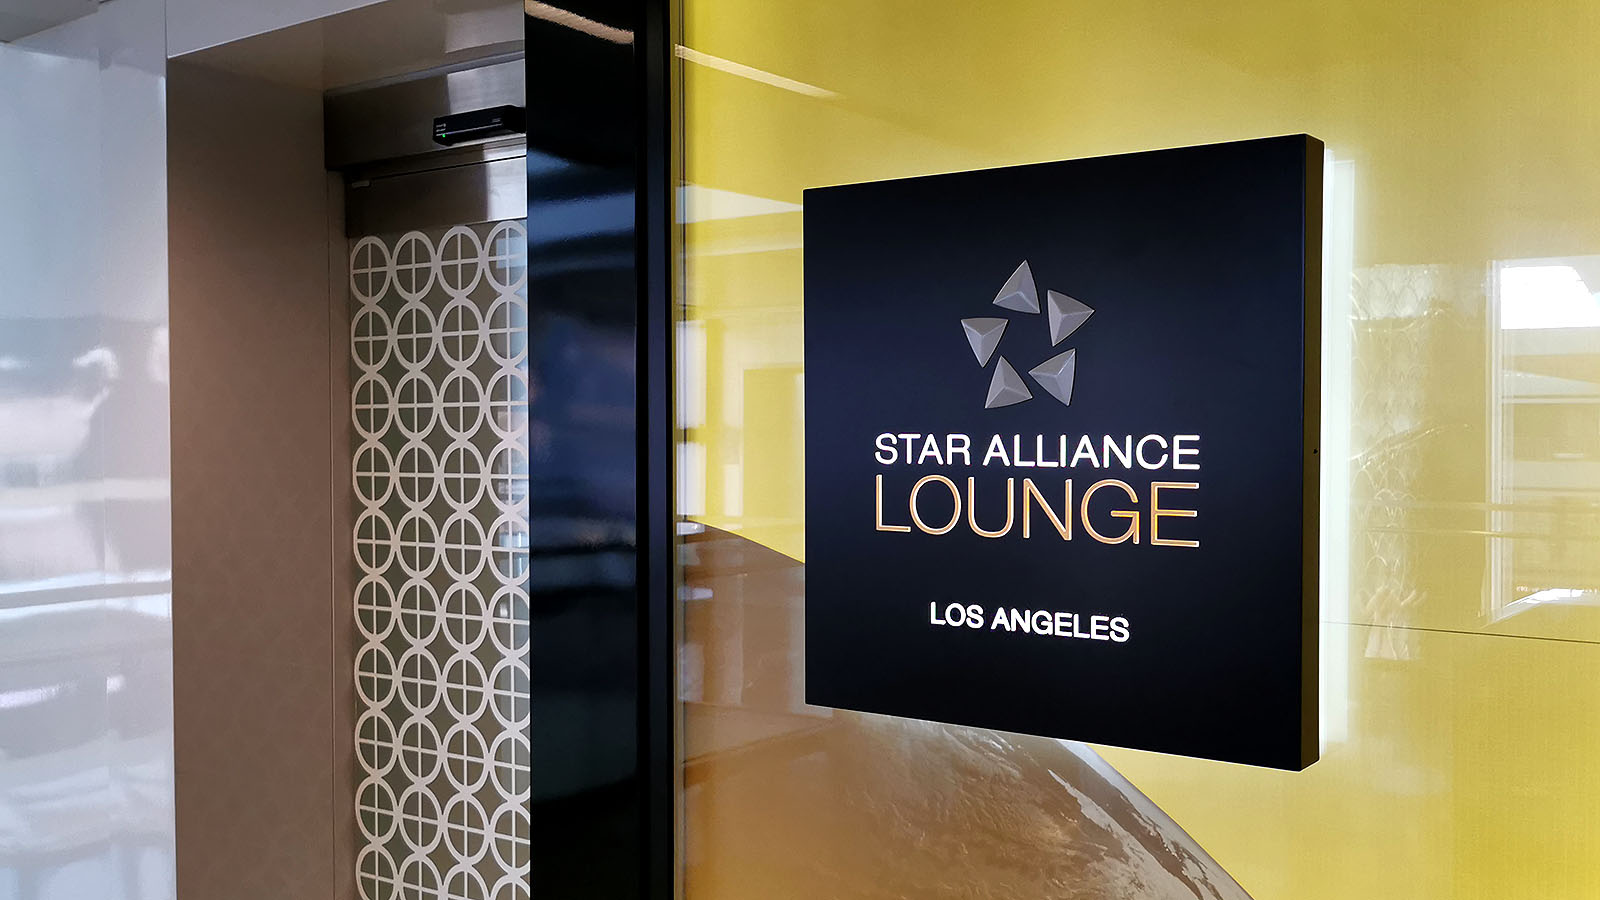 Outside the Star Alliance Lounge (Business Class) in Los Angeles